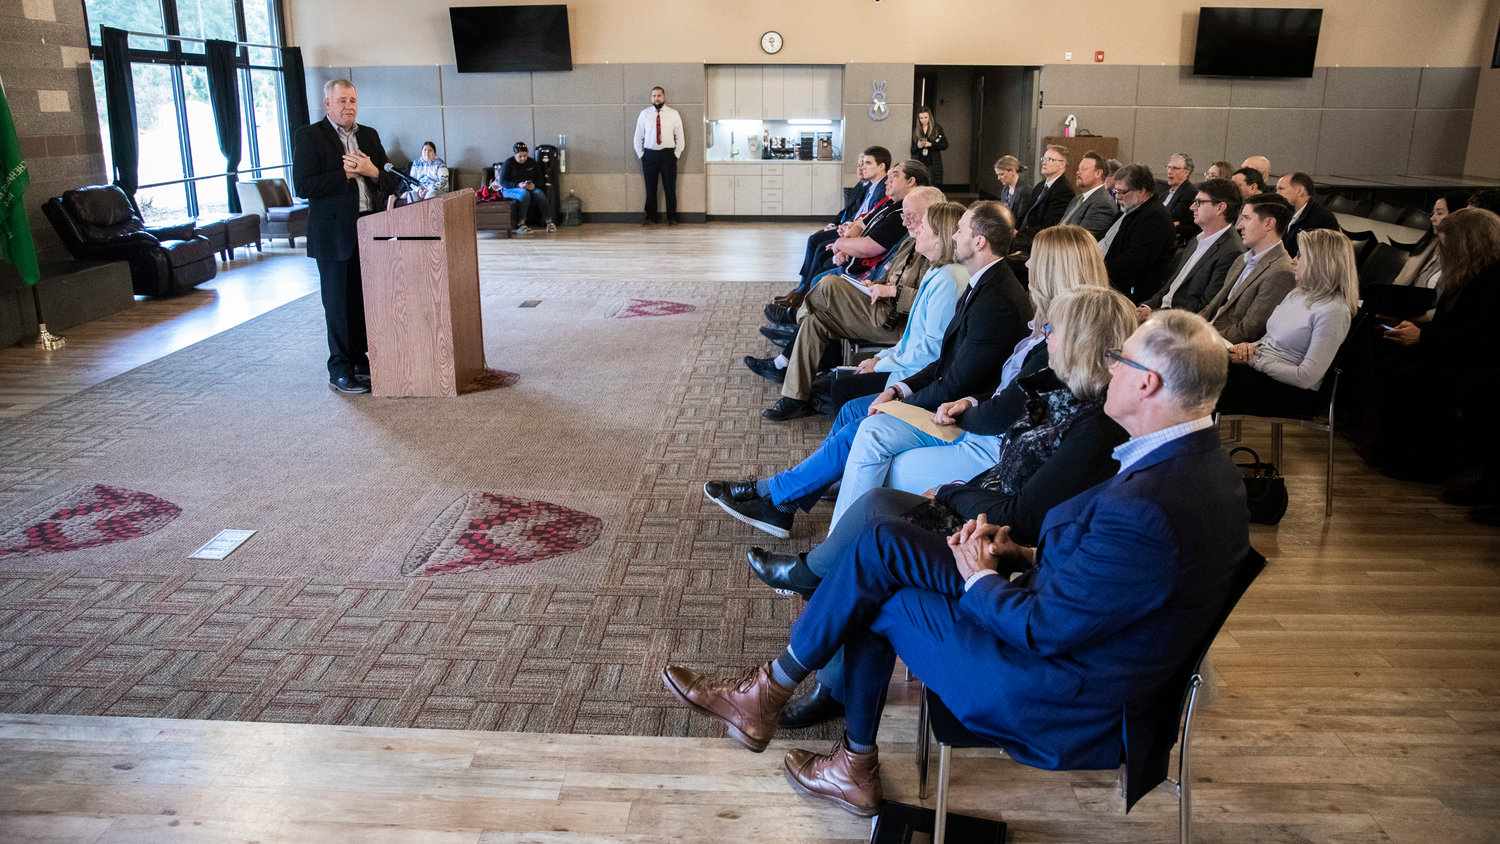 Executive Director of the Lewis County Economic Development Richard DeBolt thanks Gov. Jay Inslee for attending a meeting to discuss hydrogen power in Washington state at the Chehalis Tribe Community Center Wednesday morning.